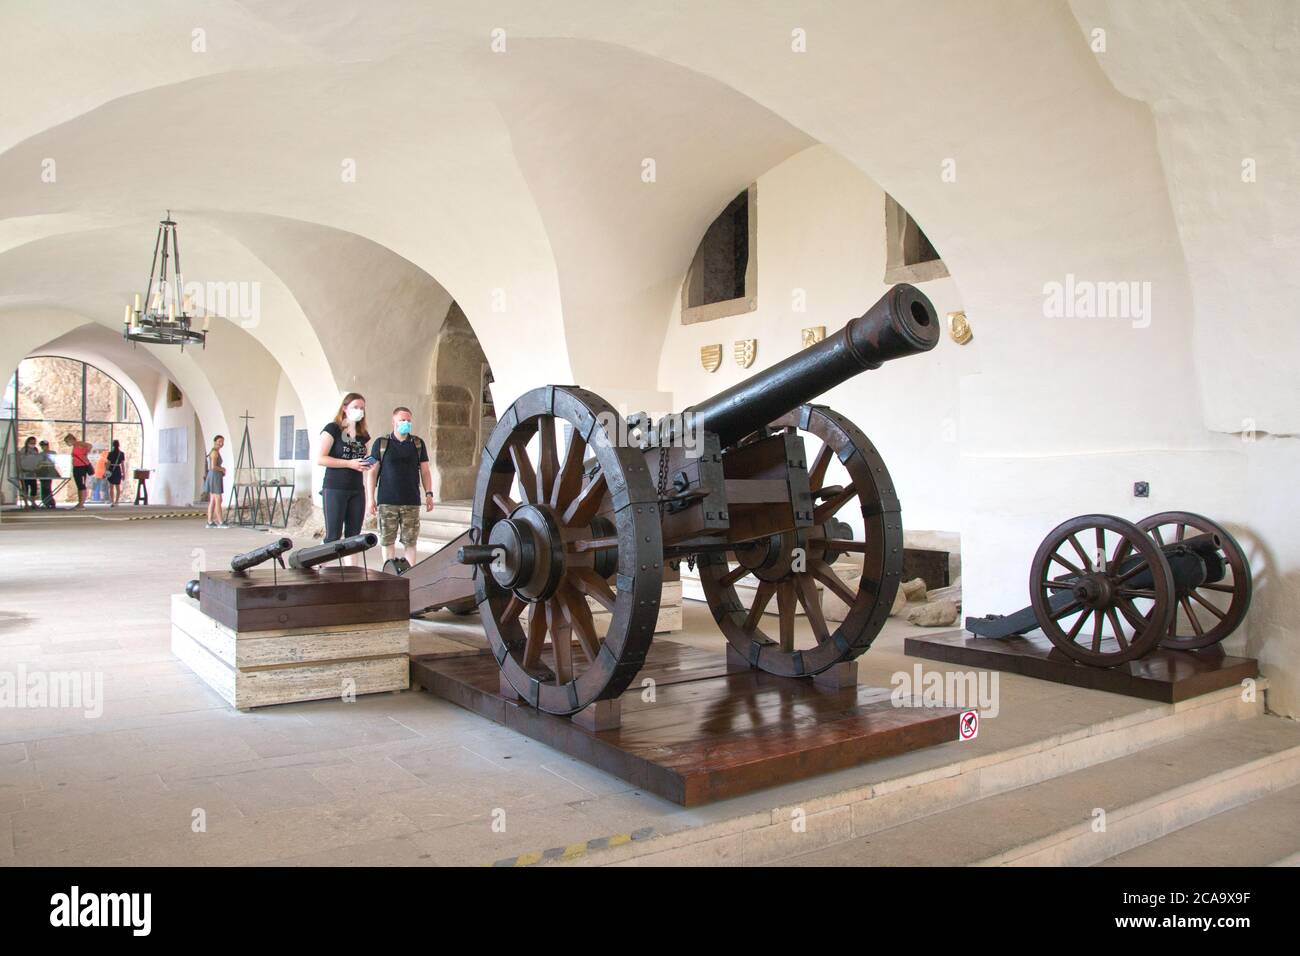 Spišské Podhradie Slovakia July 31, 2020 Old wooden wheeled cannons in the museum of the Spisské Hrad fortress. Visitors wear a covid mask. Stock Photo